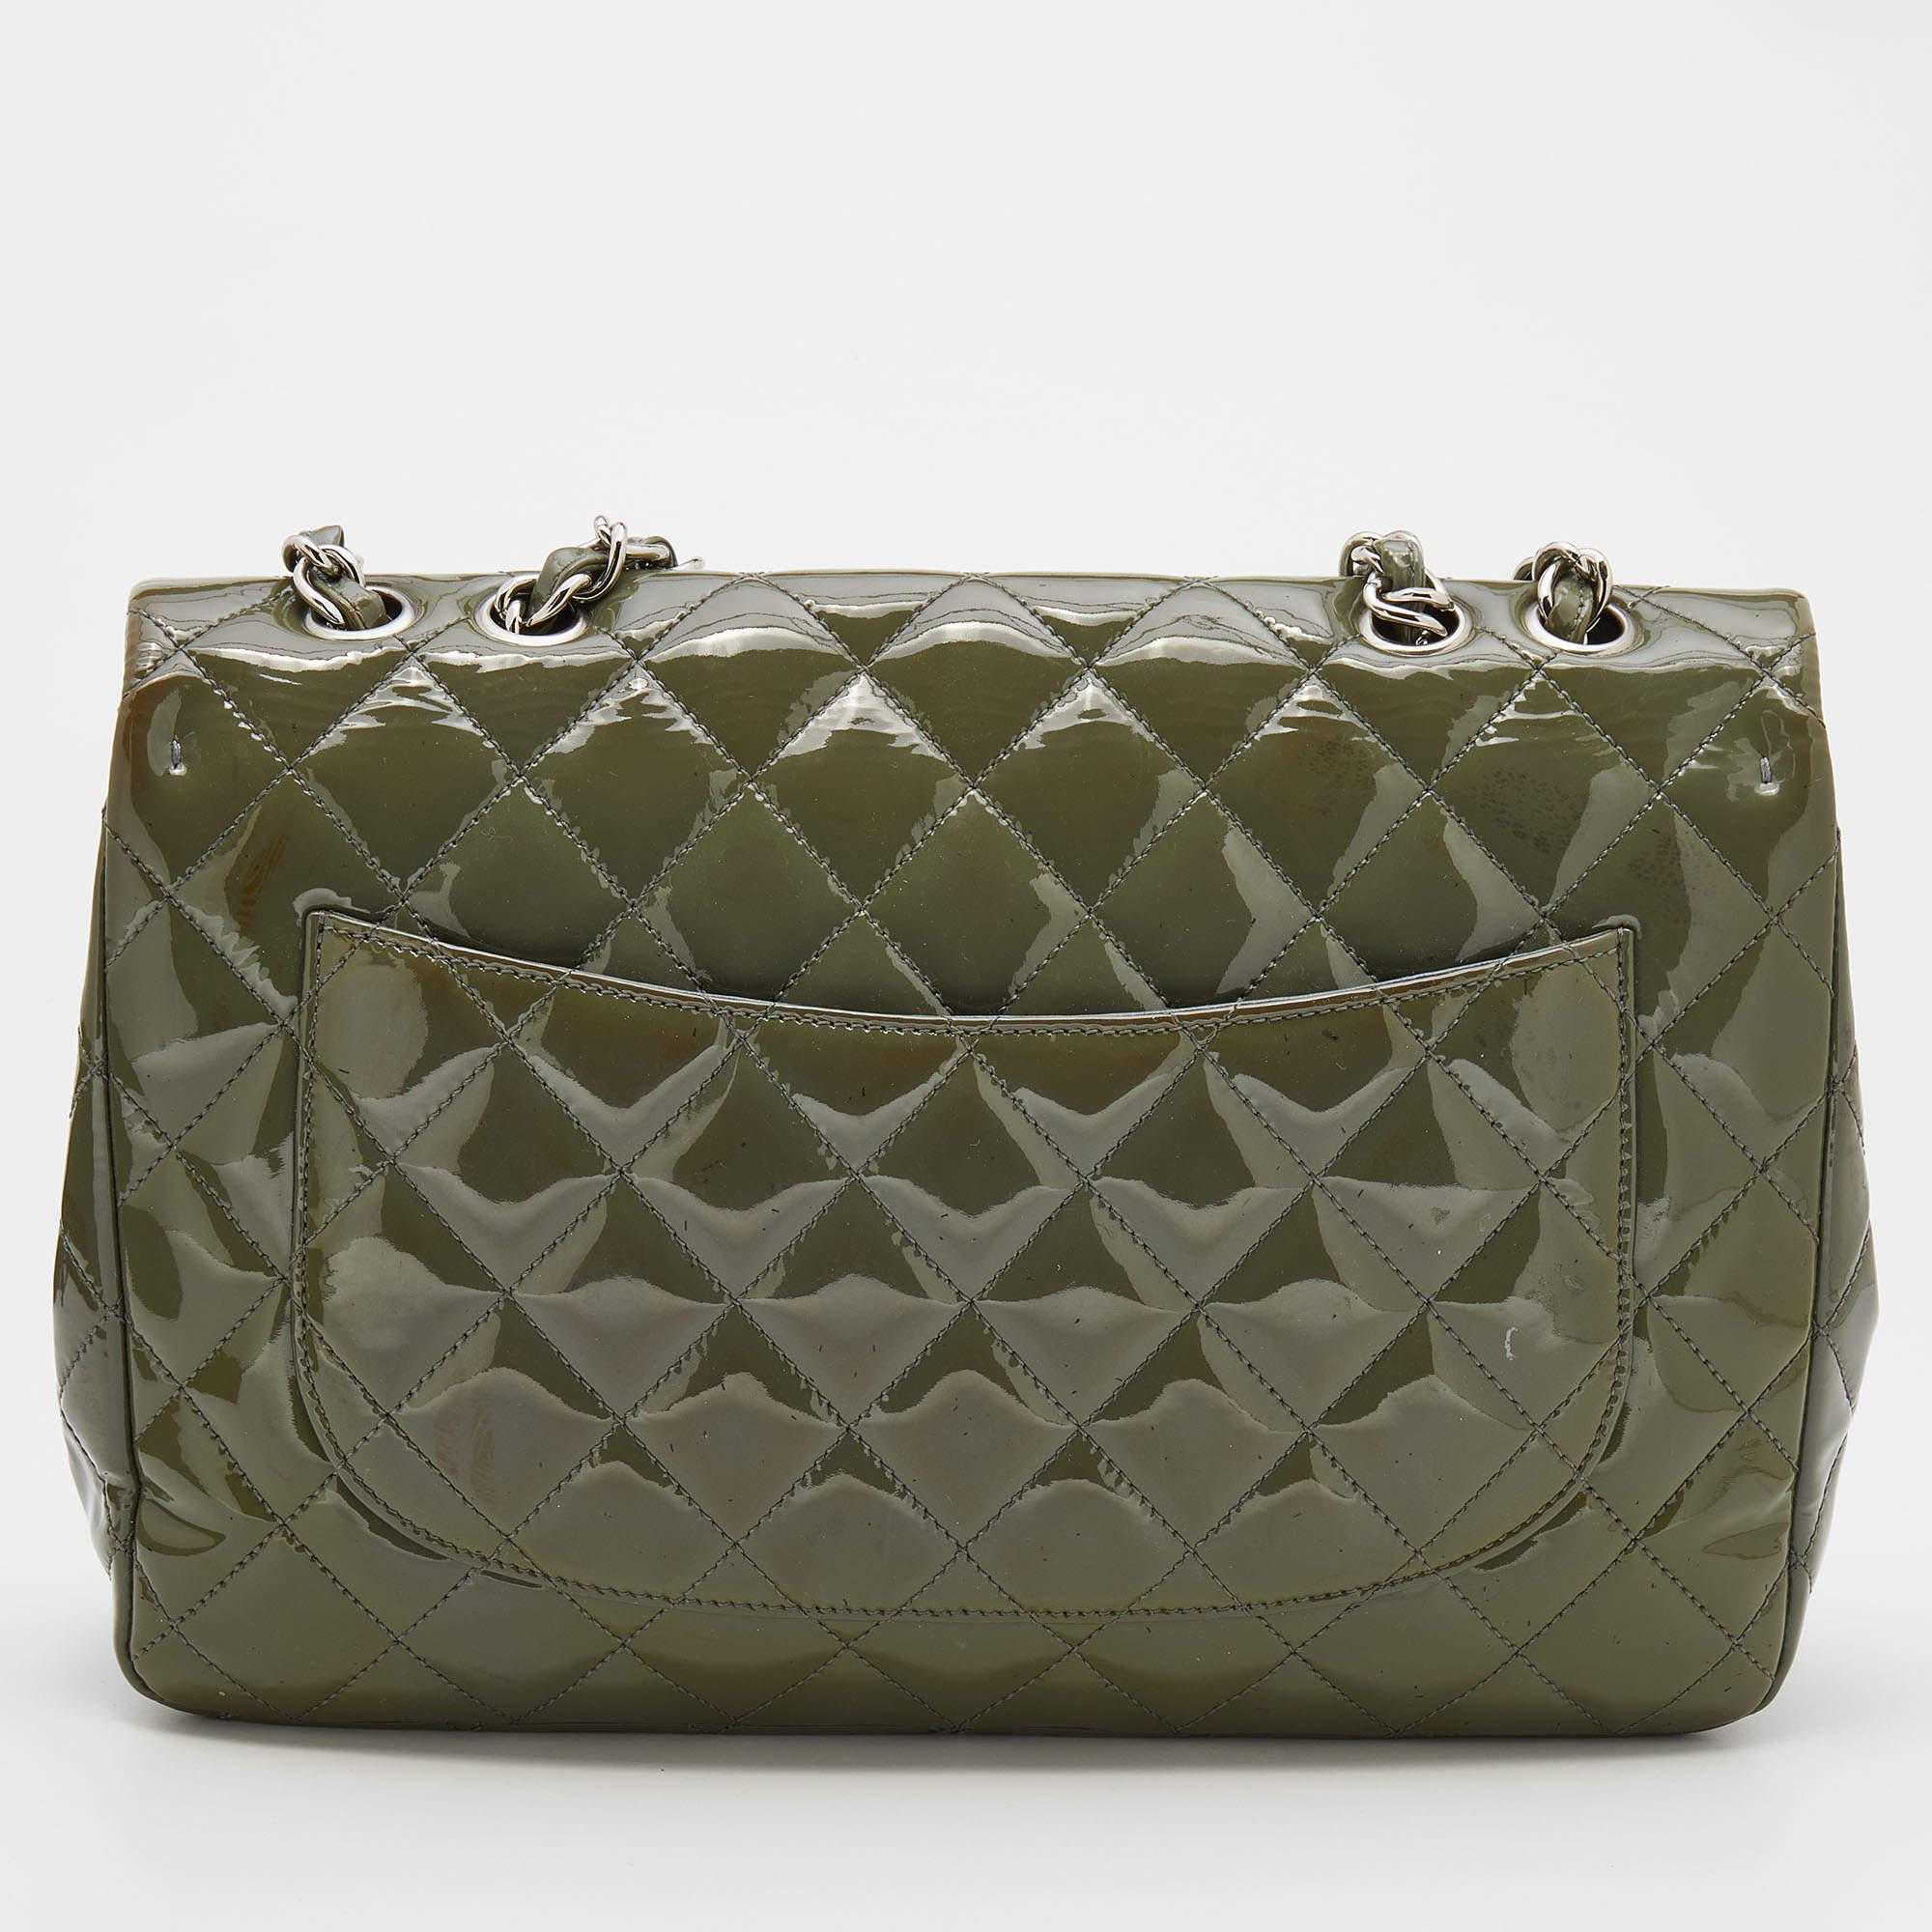 Chanel knows best how to craft high-value, upscale pieces that gain popularity in no time. Since its creation, the Jumbo Classic Single Flap bag has emerged as an ultra-luxurious, modern commodity. Designed using olive-green patent leather, this bag